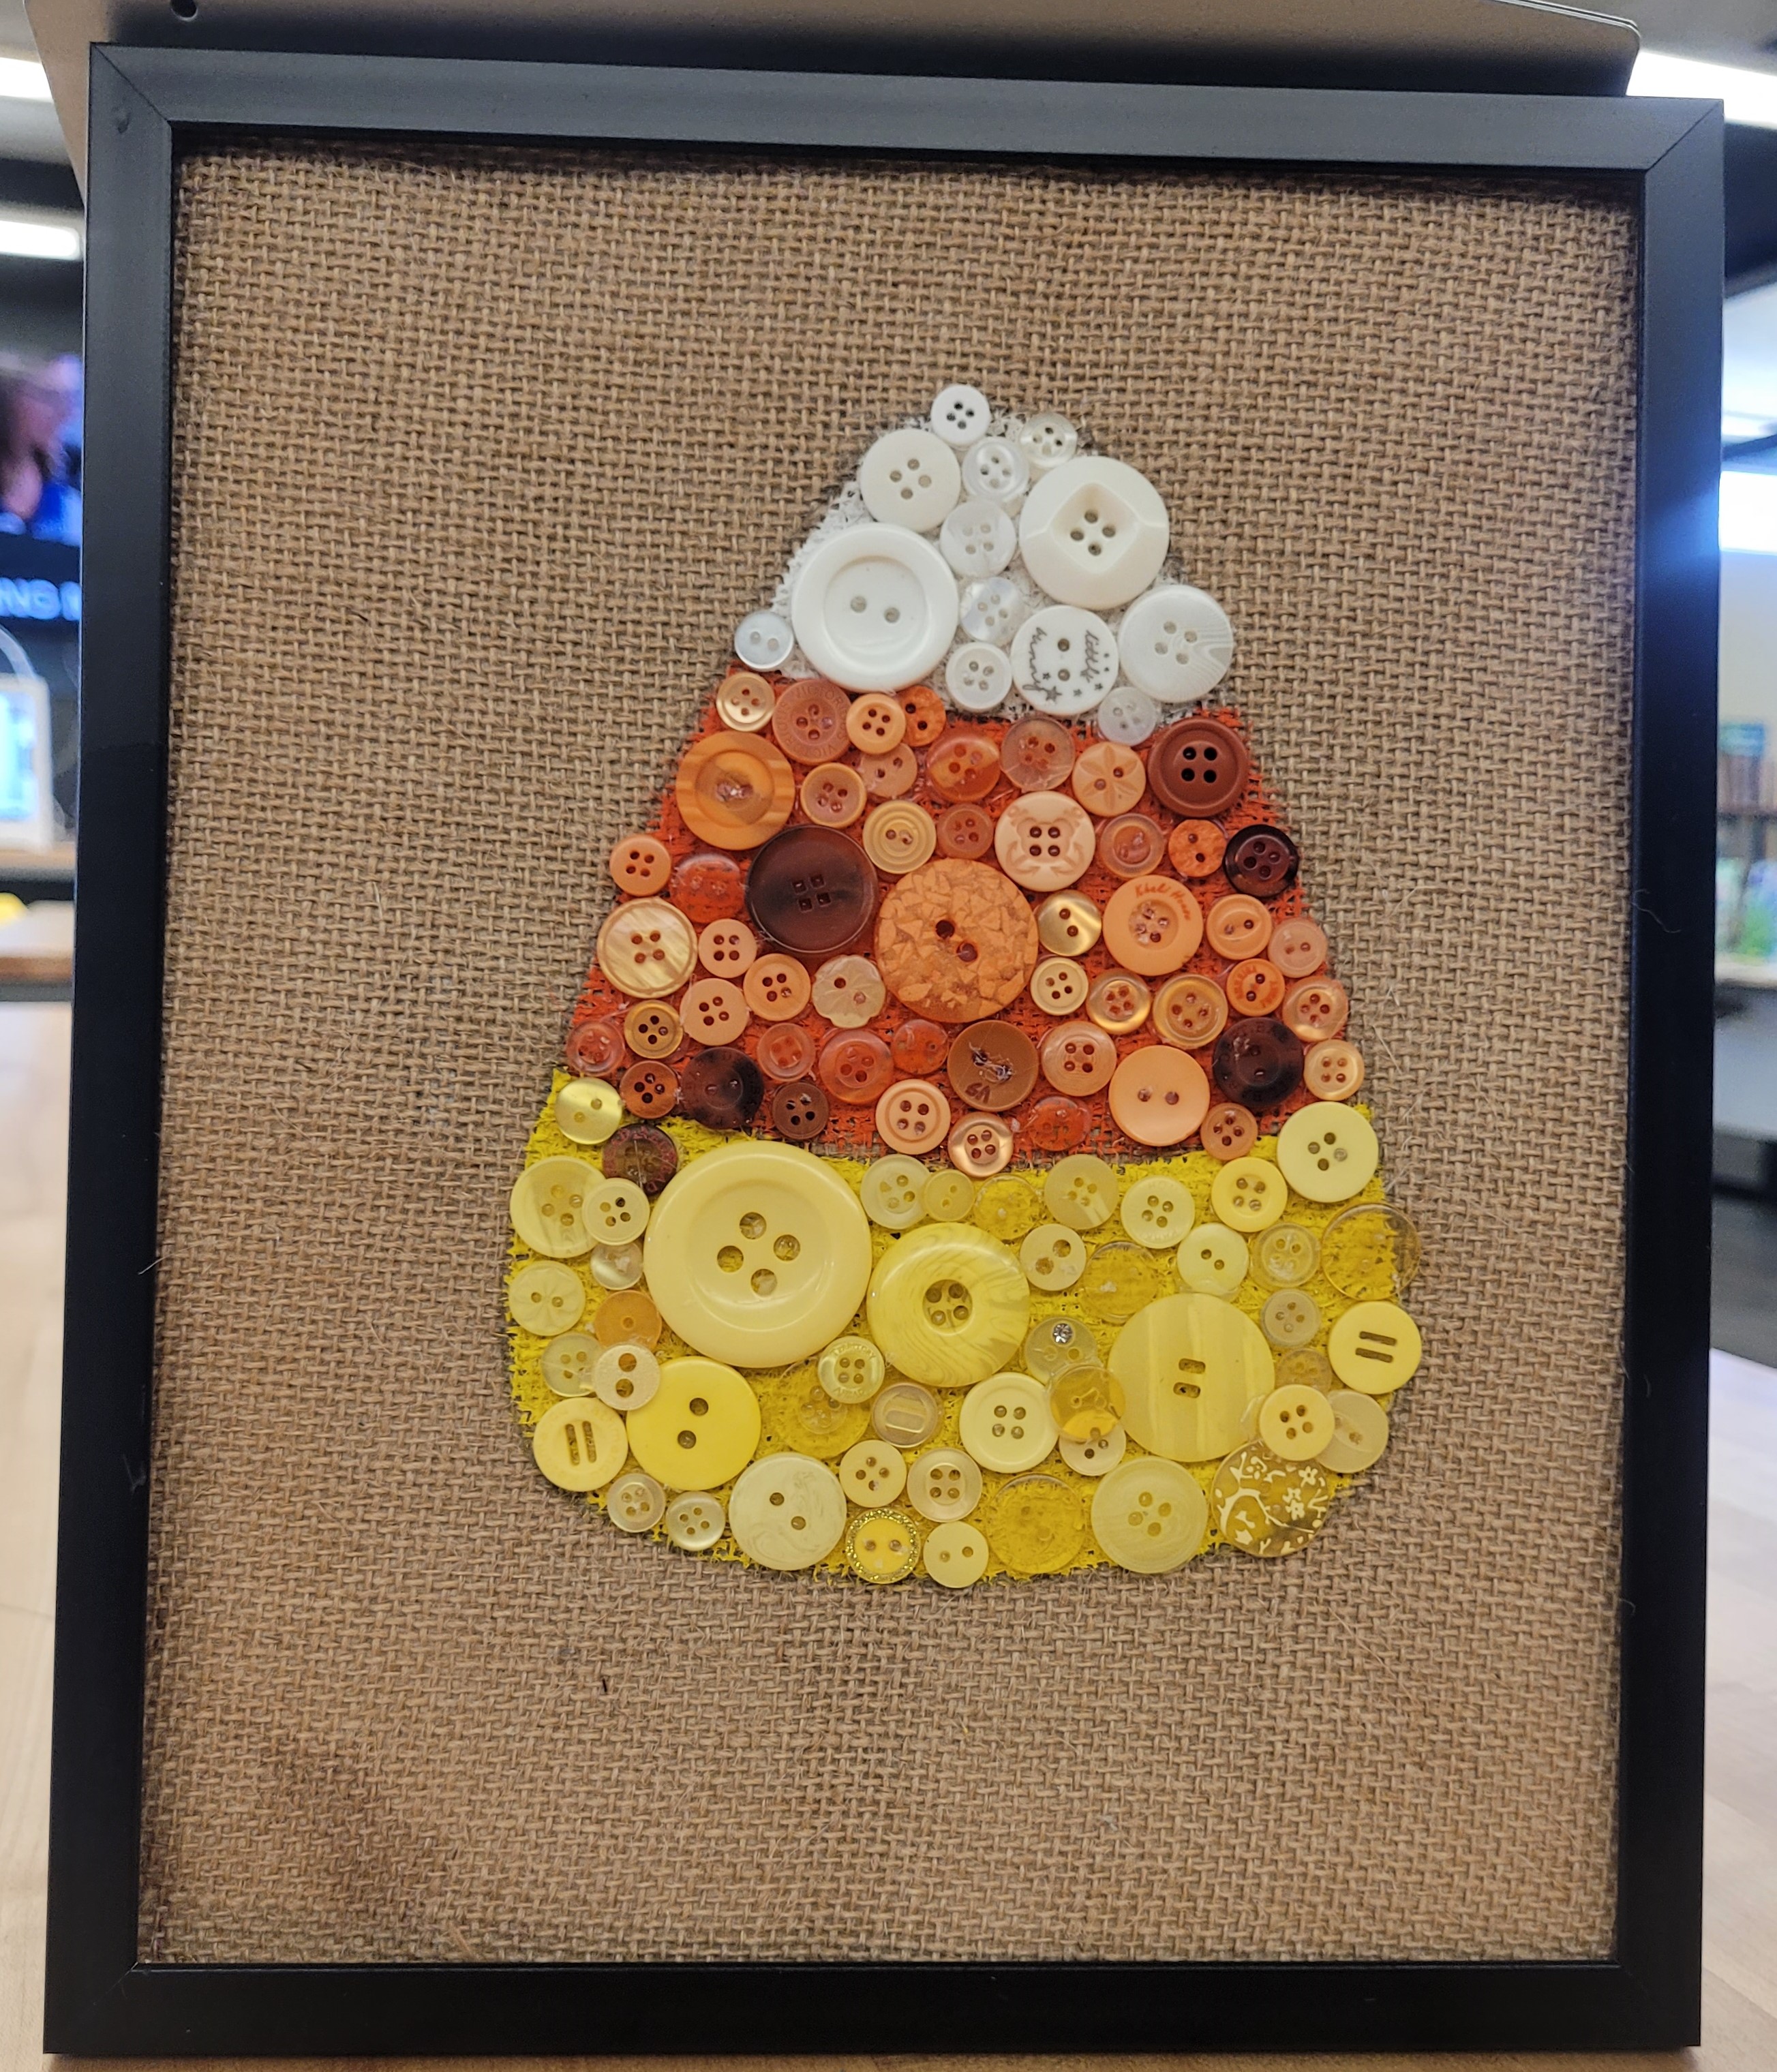 white, orange, and yellow candy corn filled in with white, orange and yellow buttons on a burlap back in a black picture frame.